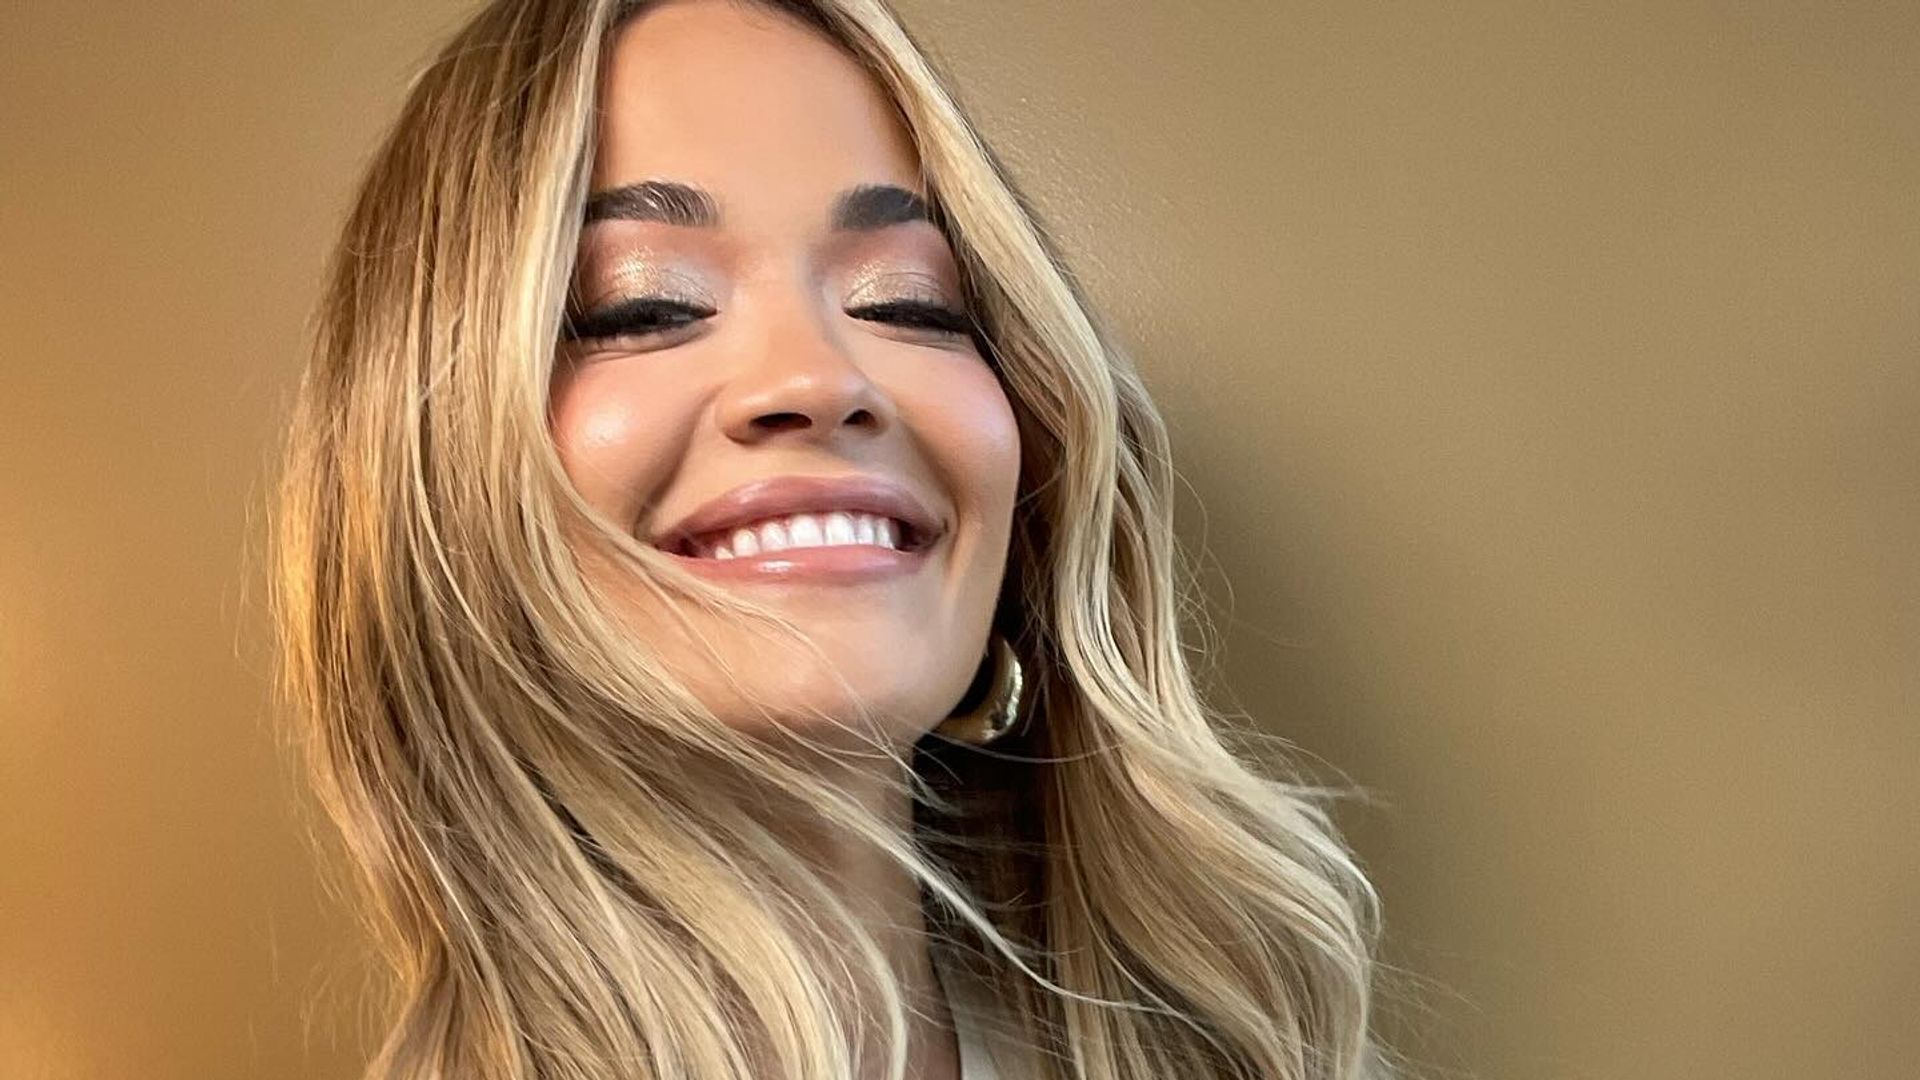 Rita Ora shares a smiling picture of her in a graphic tee 